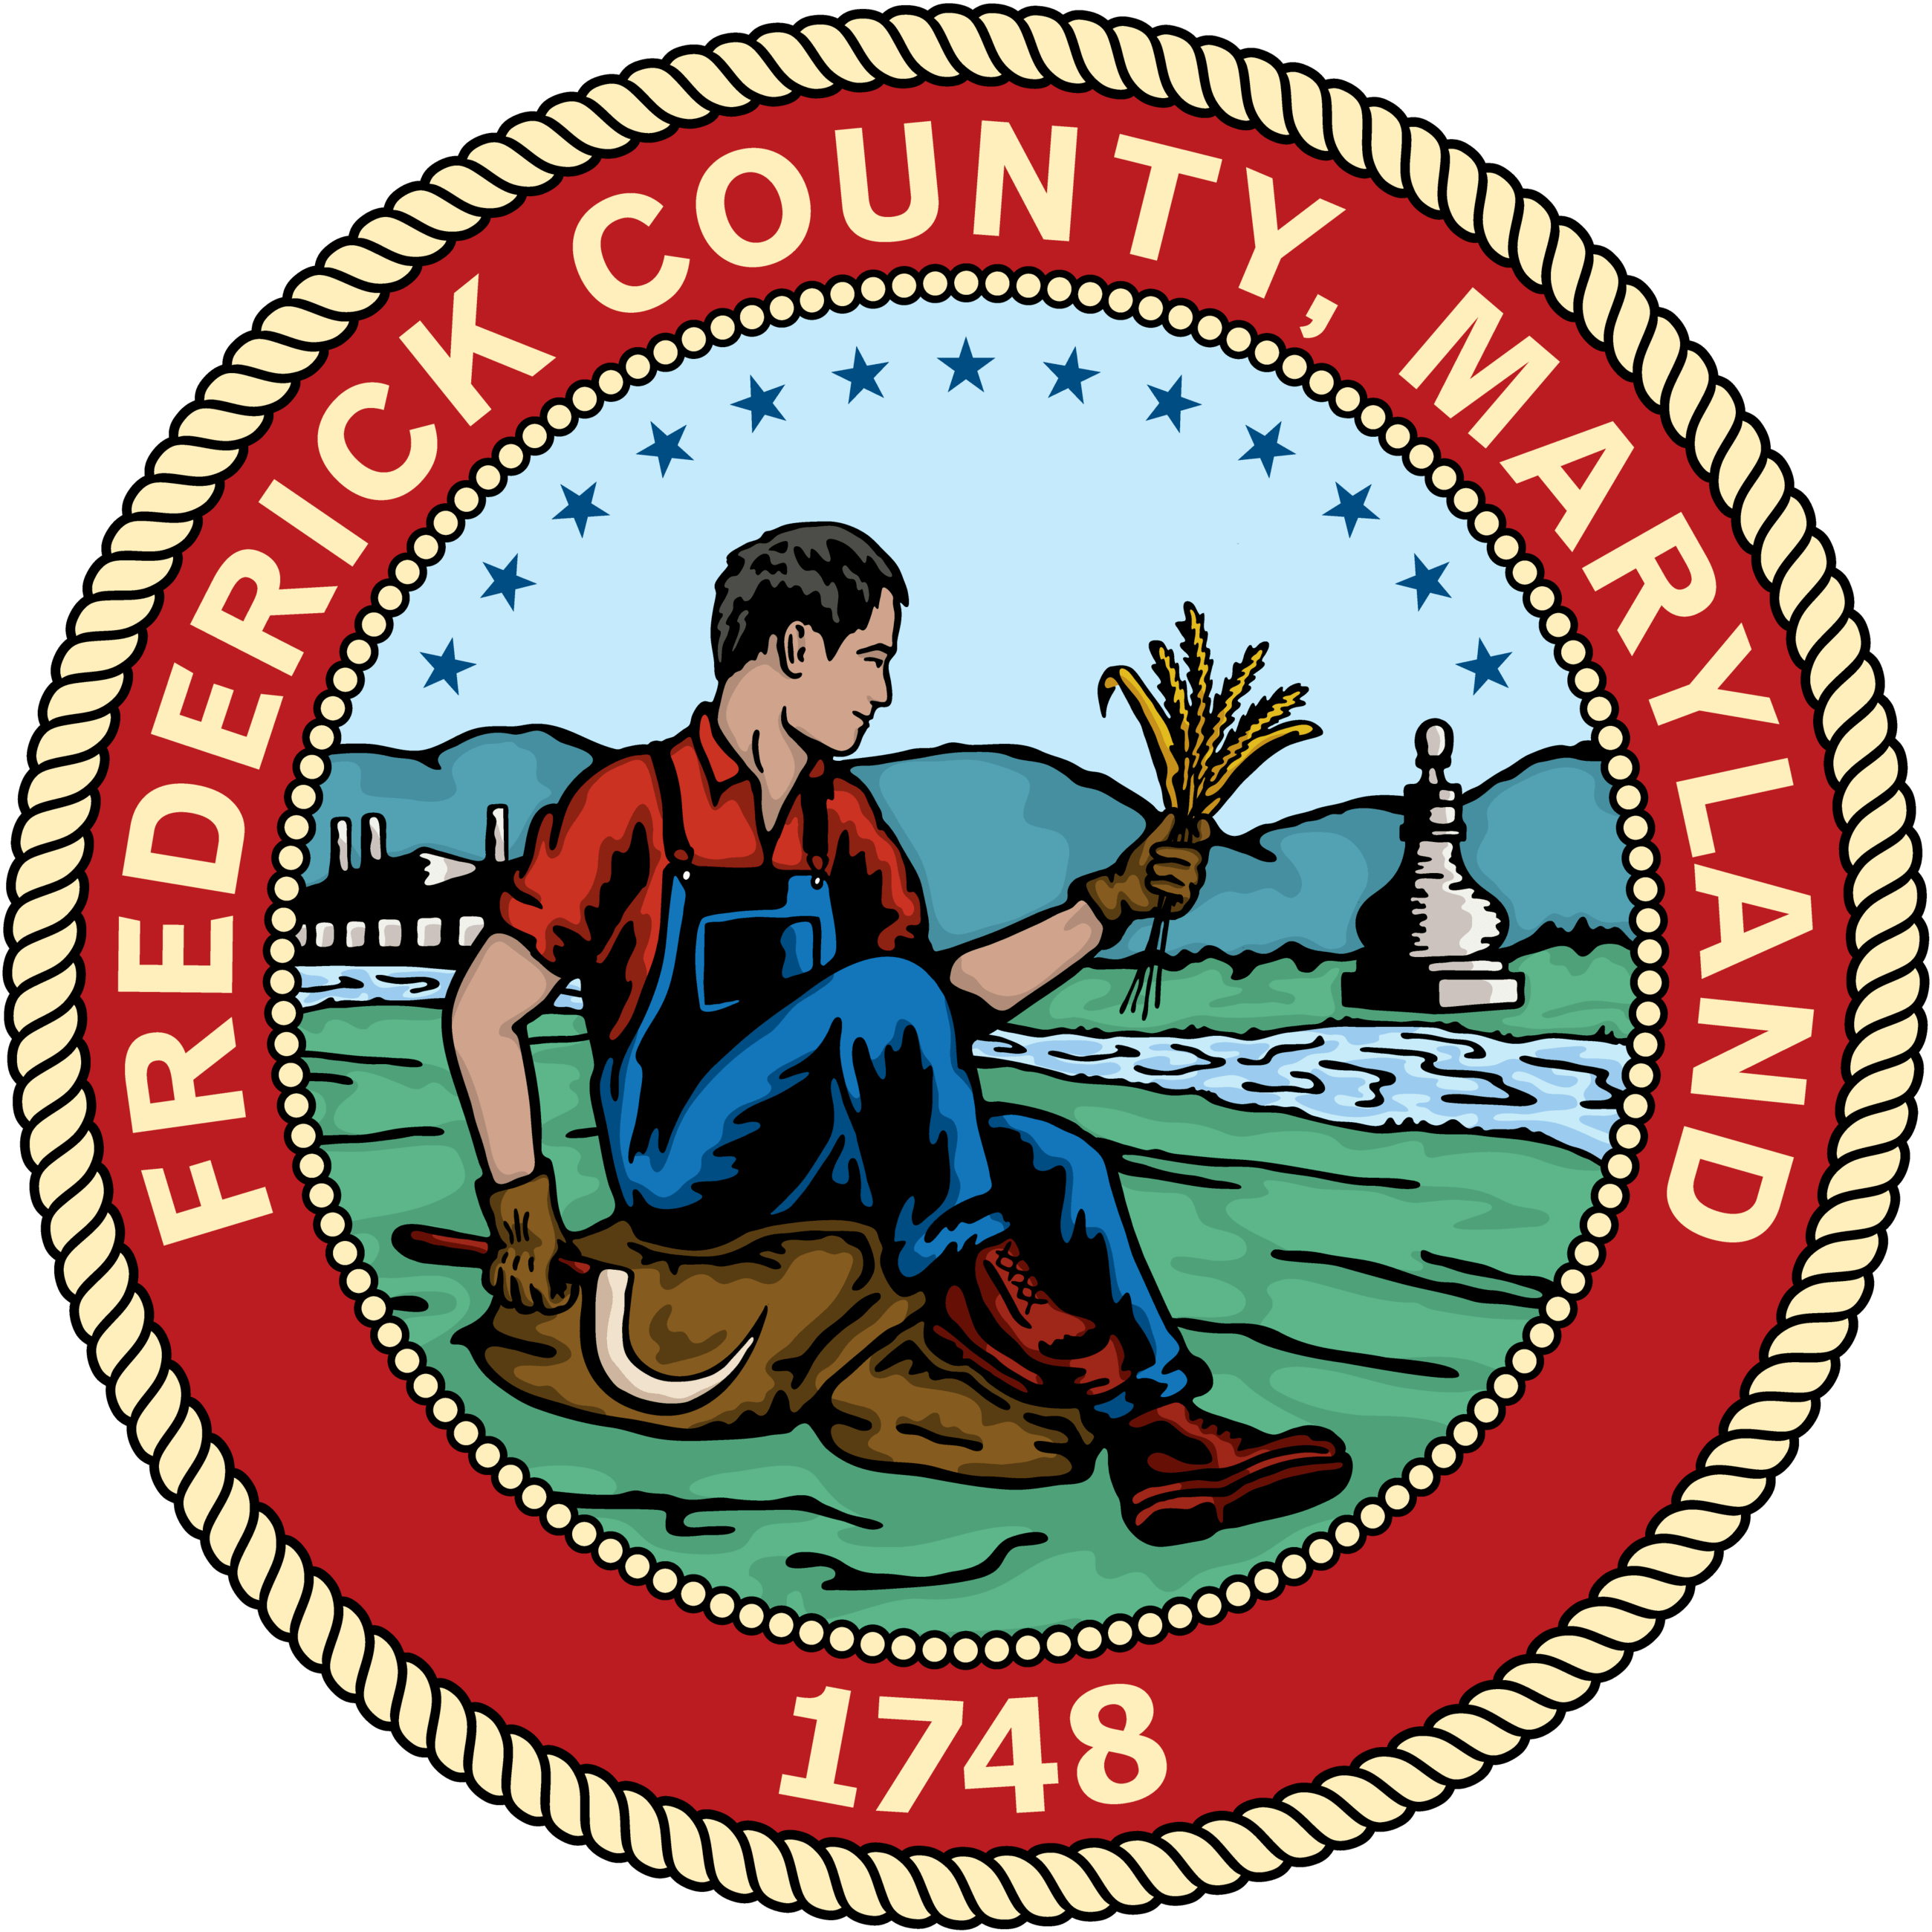 Frederick County Council Considering Application For CDBG Funding